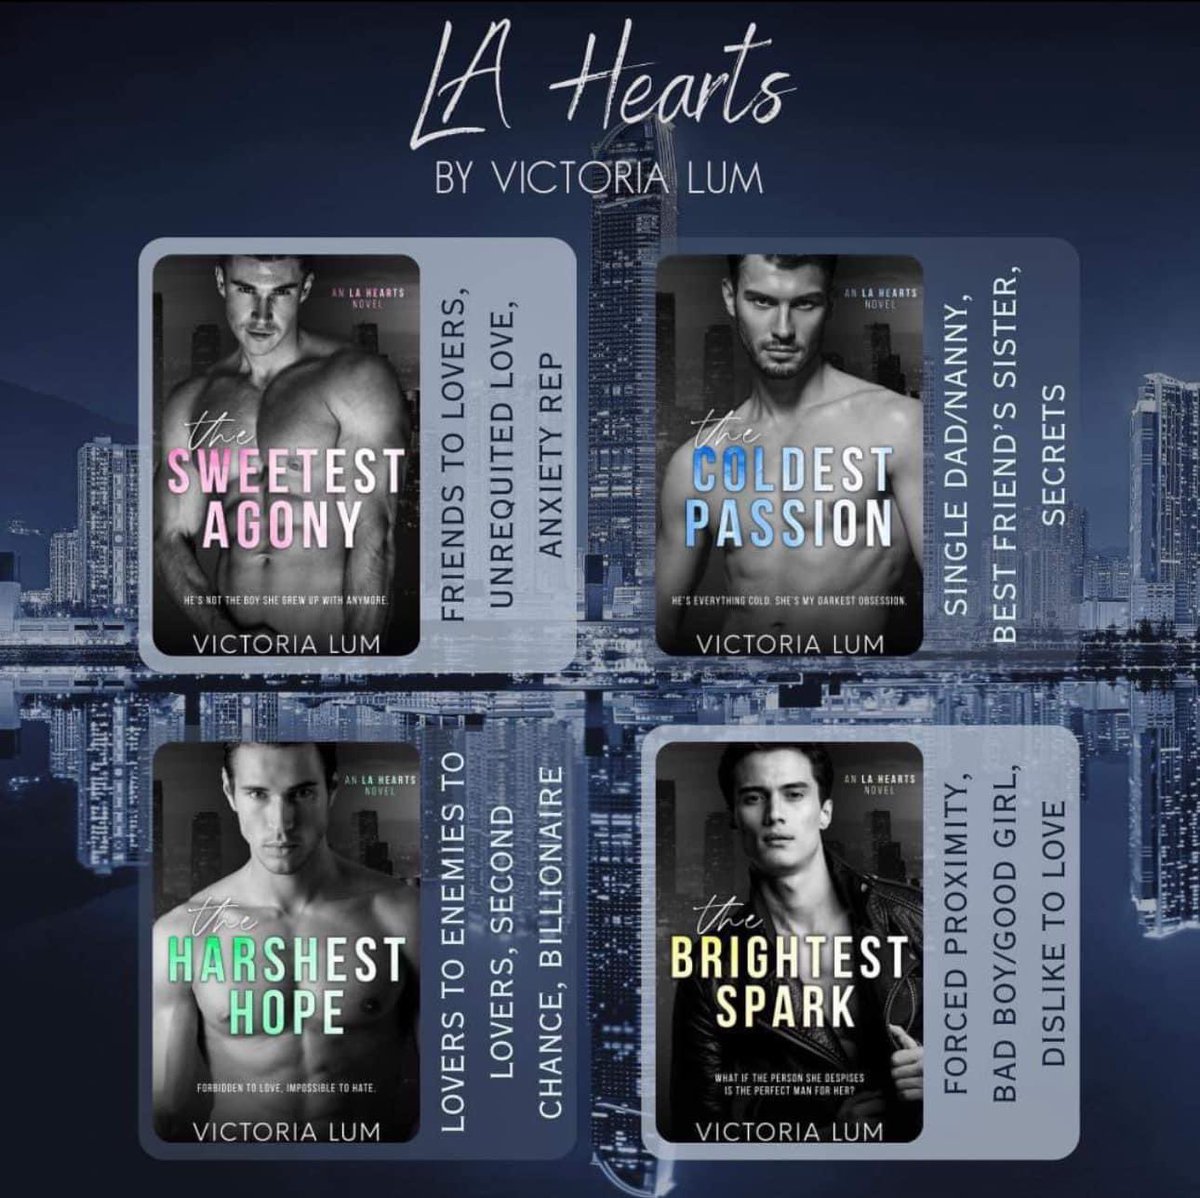 The LA Hearts series by Victoria Lum is complete and available on KU!!!
 #authorvictorialum #TheLAHeartsSeries #torturedhero #booktok #spicyromance #KU  #angstyromance #TheBrightestSpark #TheSweetestAgony #TheColdestPassion #TheHarshestHope #HeFellFirst #forcedpeoximity